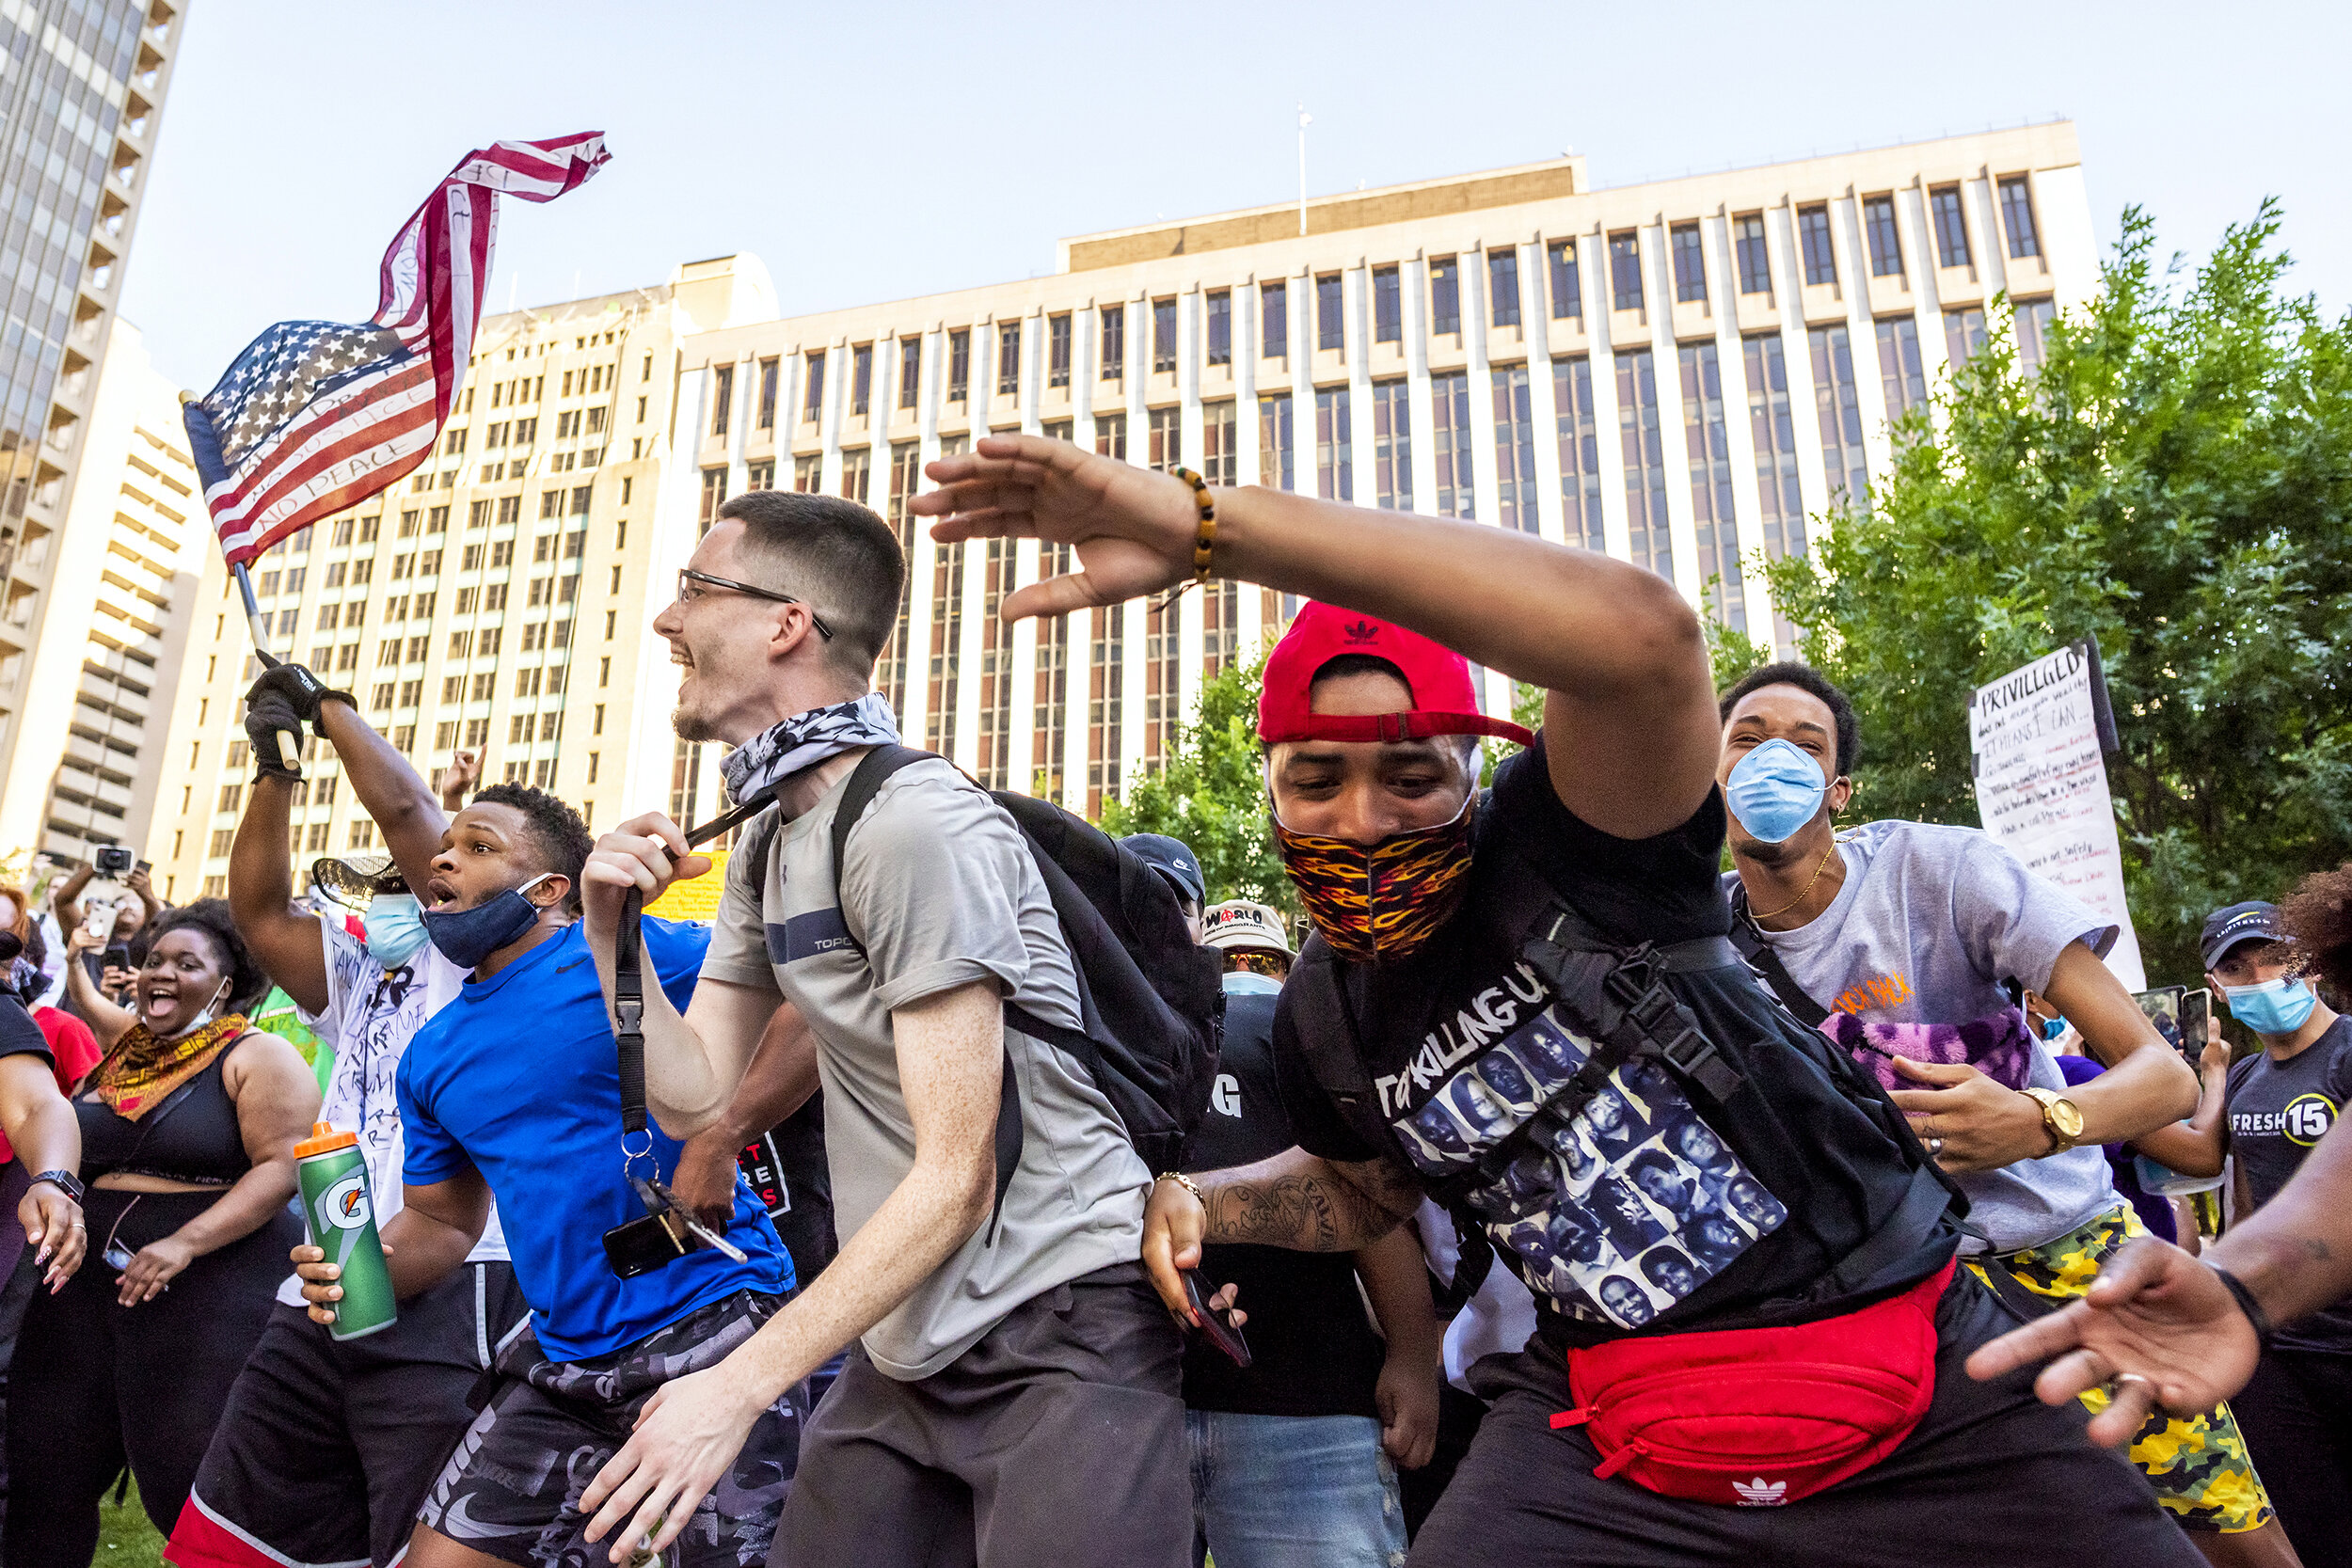  Protesters dance at Belo Garden after marching through downtown Dallas, TX on June 6, 2020.   While protests organically surged after the death of George Floyd, they soon sprung into organized affairs, to include medical tents and, in this case, a D